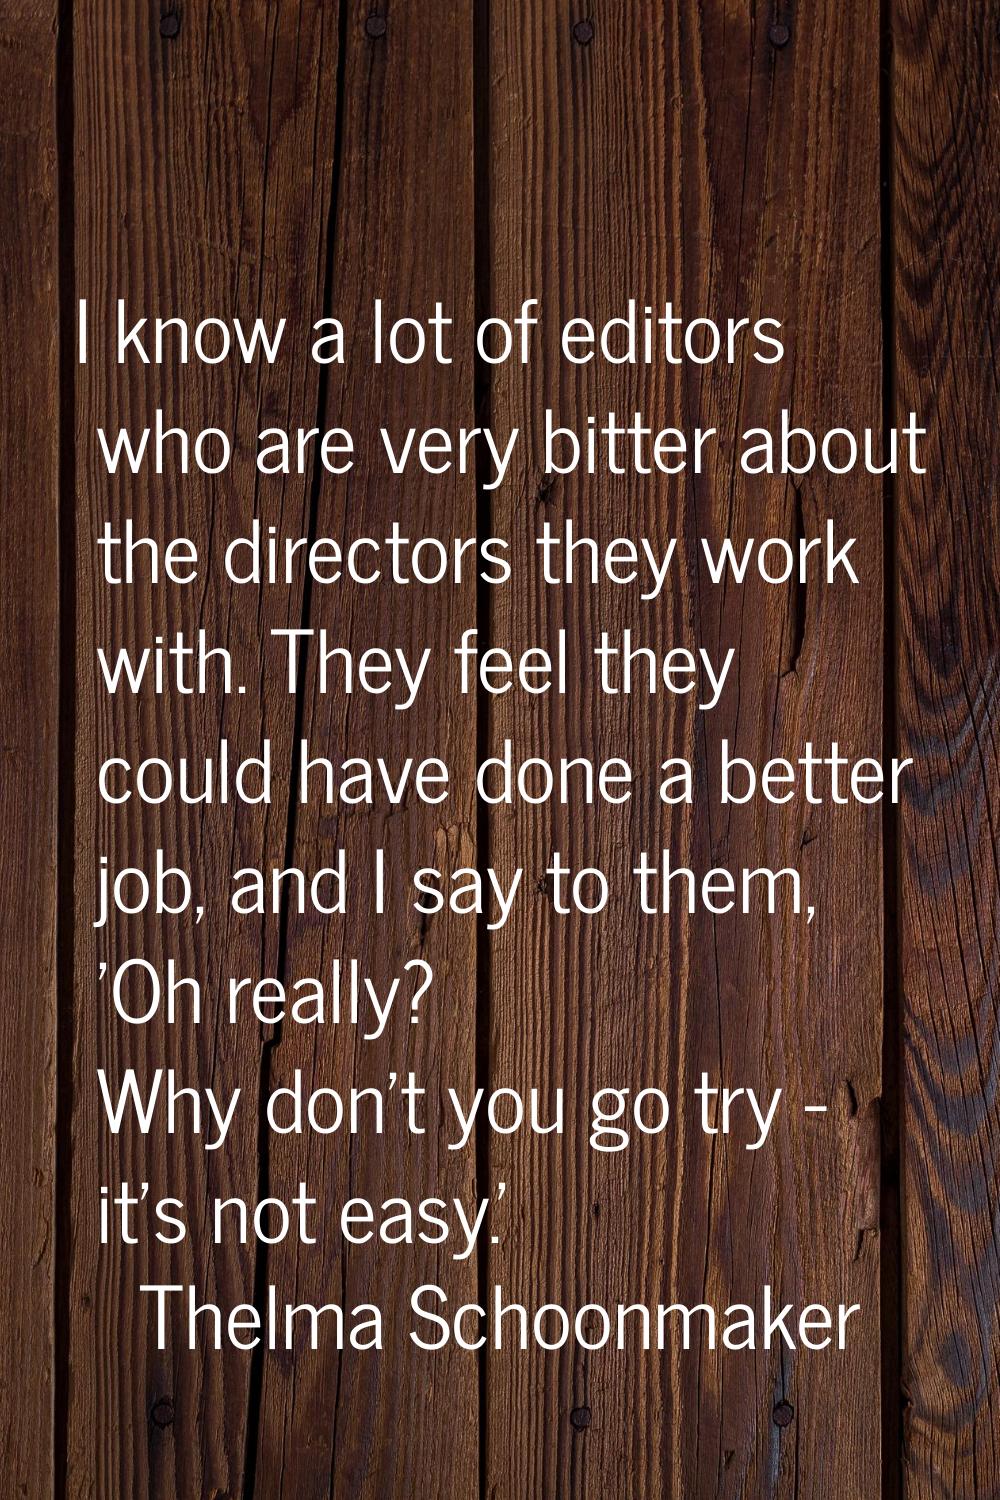 I know a lot of editors who are very bitter about the directors they work with. They feel they coul